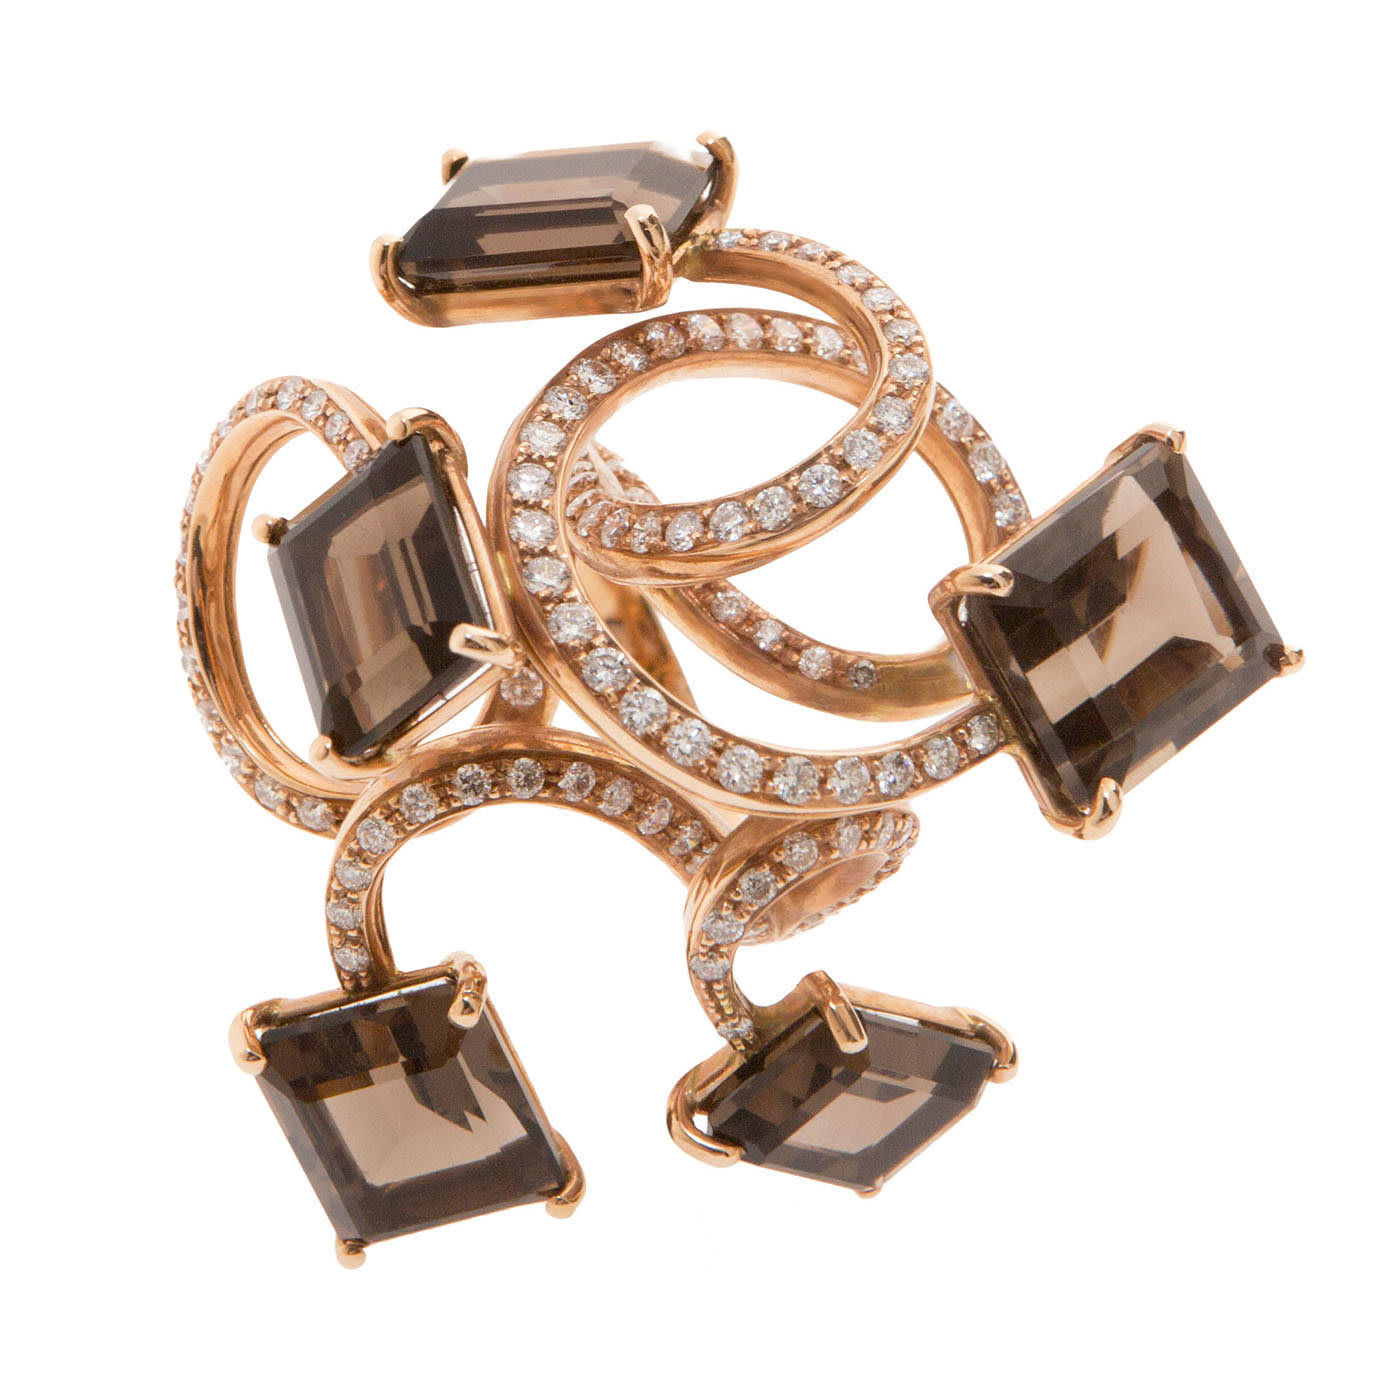 Dance Rose Gold Ring - Alessandro Palwer